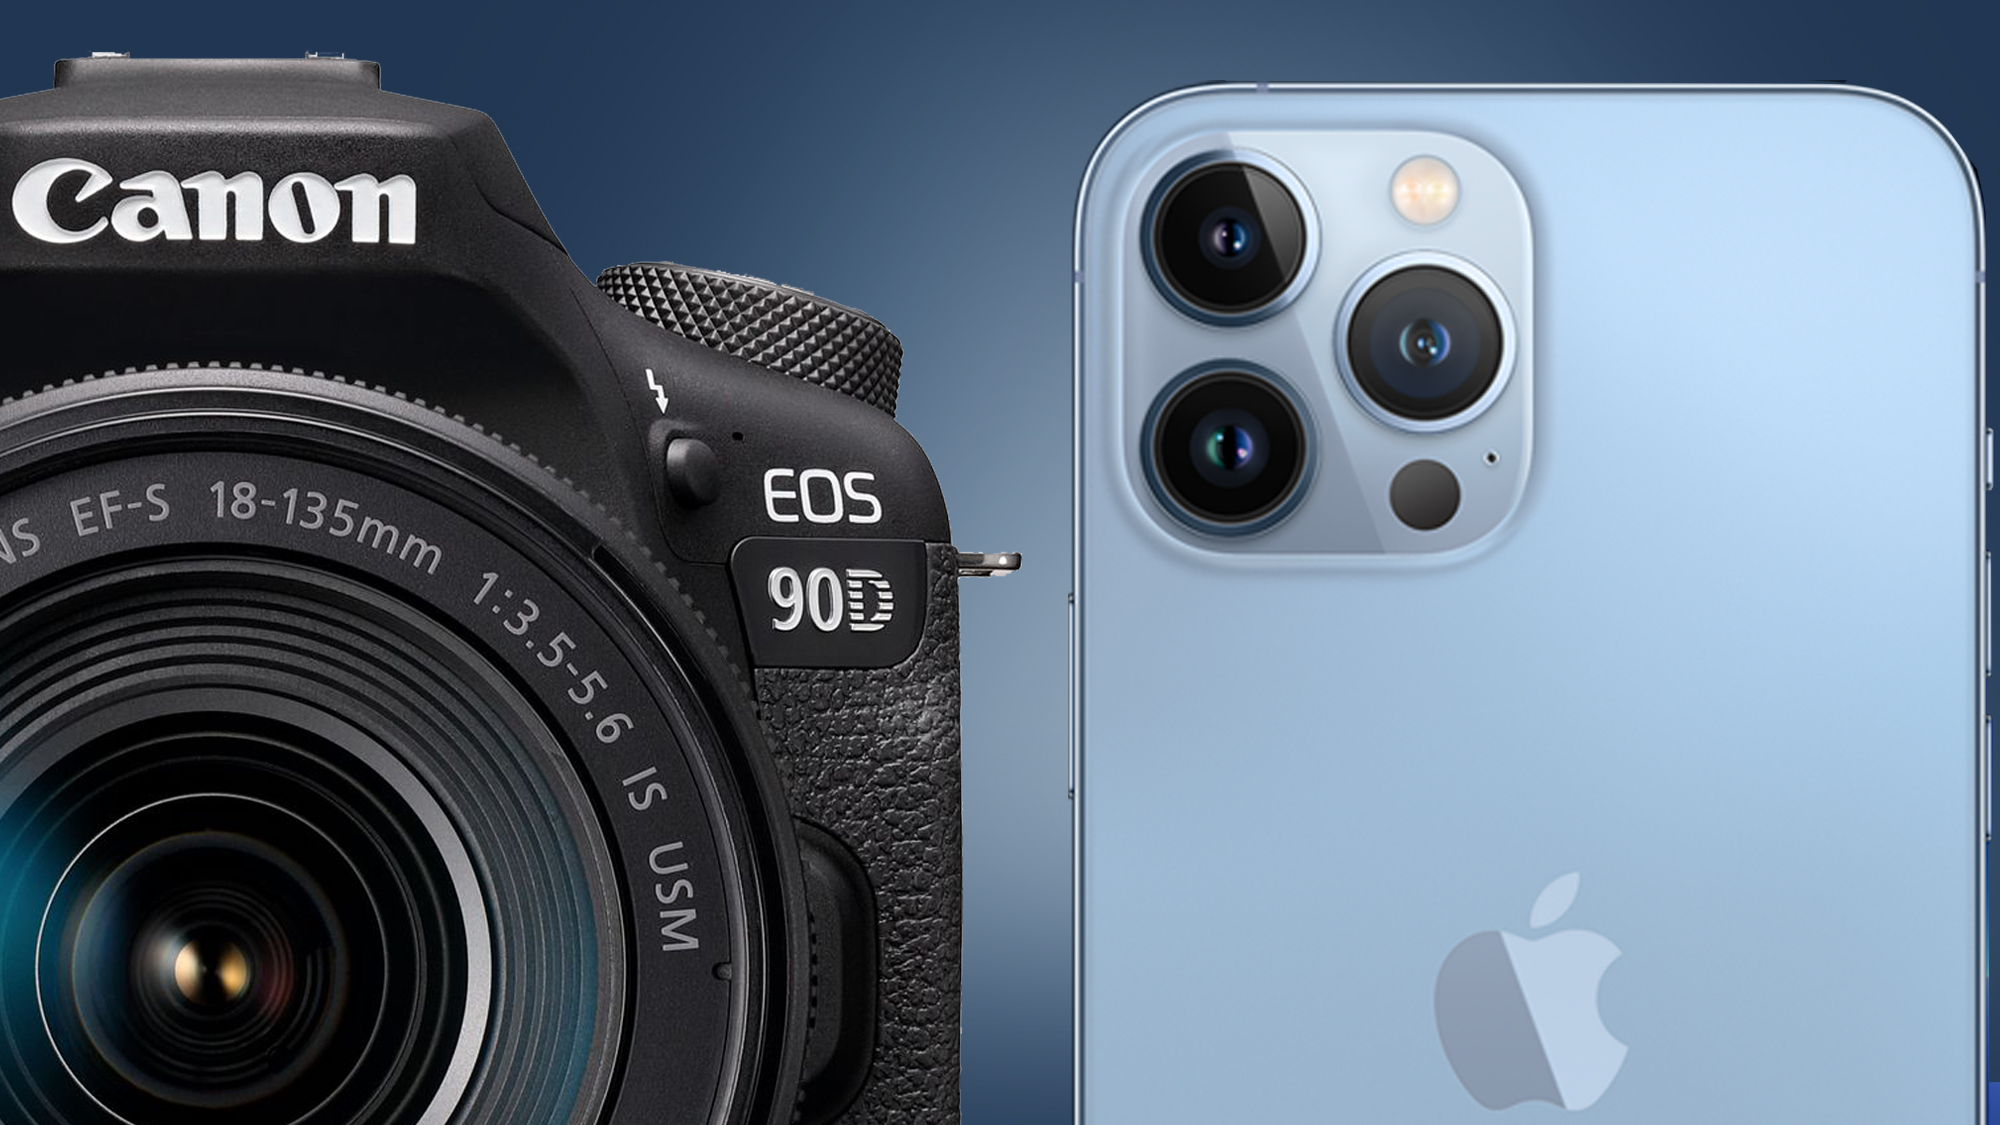 Technical readouts reveal faster shutter speeds, improved ISO and more in  iPhone 11 Pro: Digital Photography Review